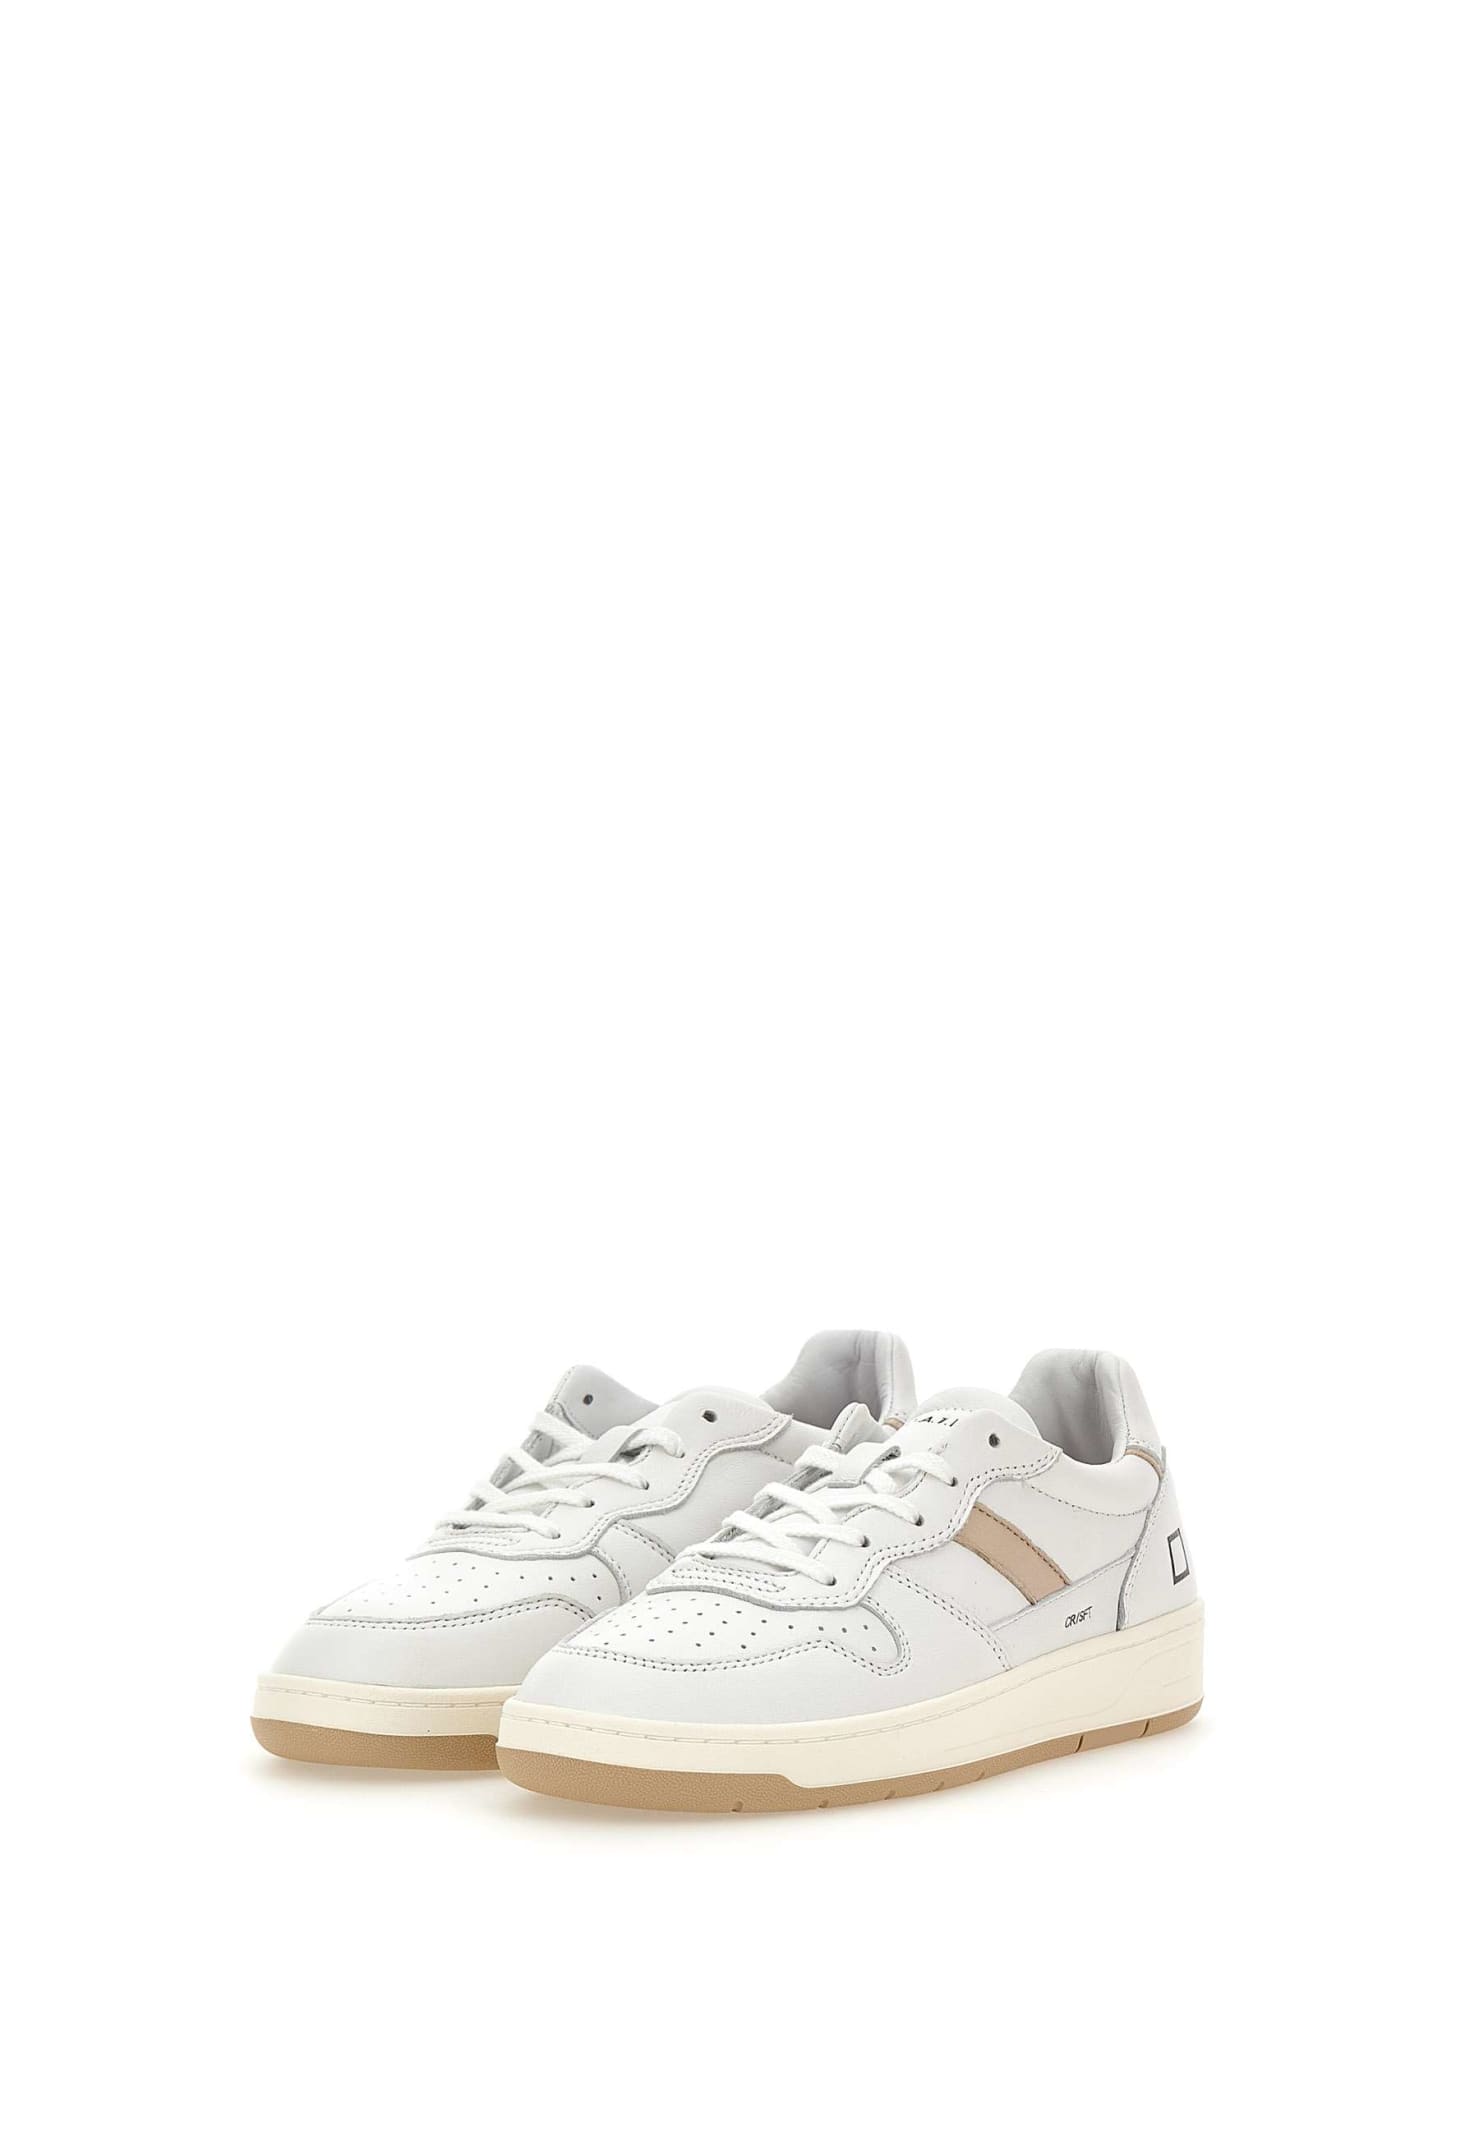 Shop Date Court 2.0 Soft Leather Sneakers In White